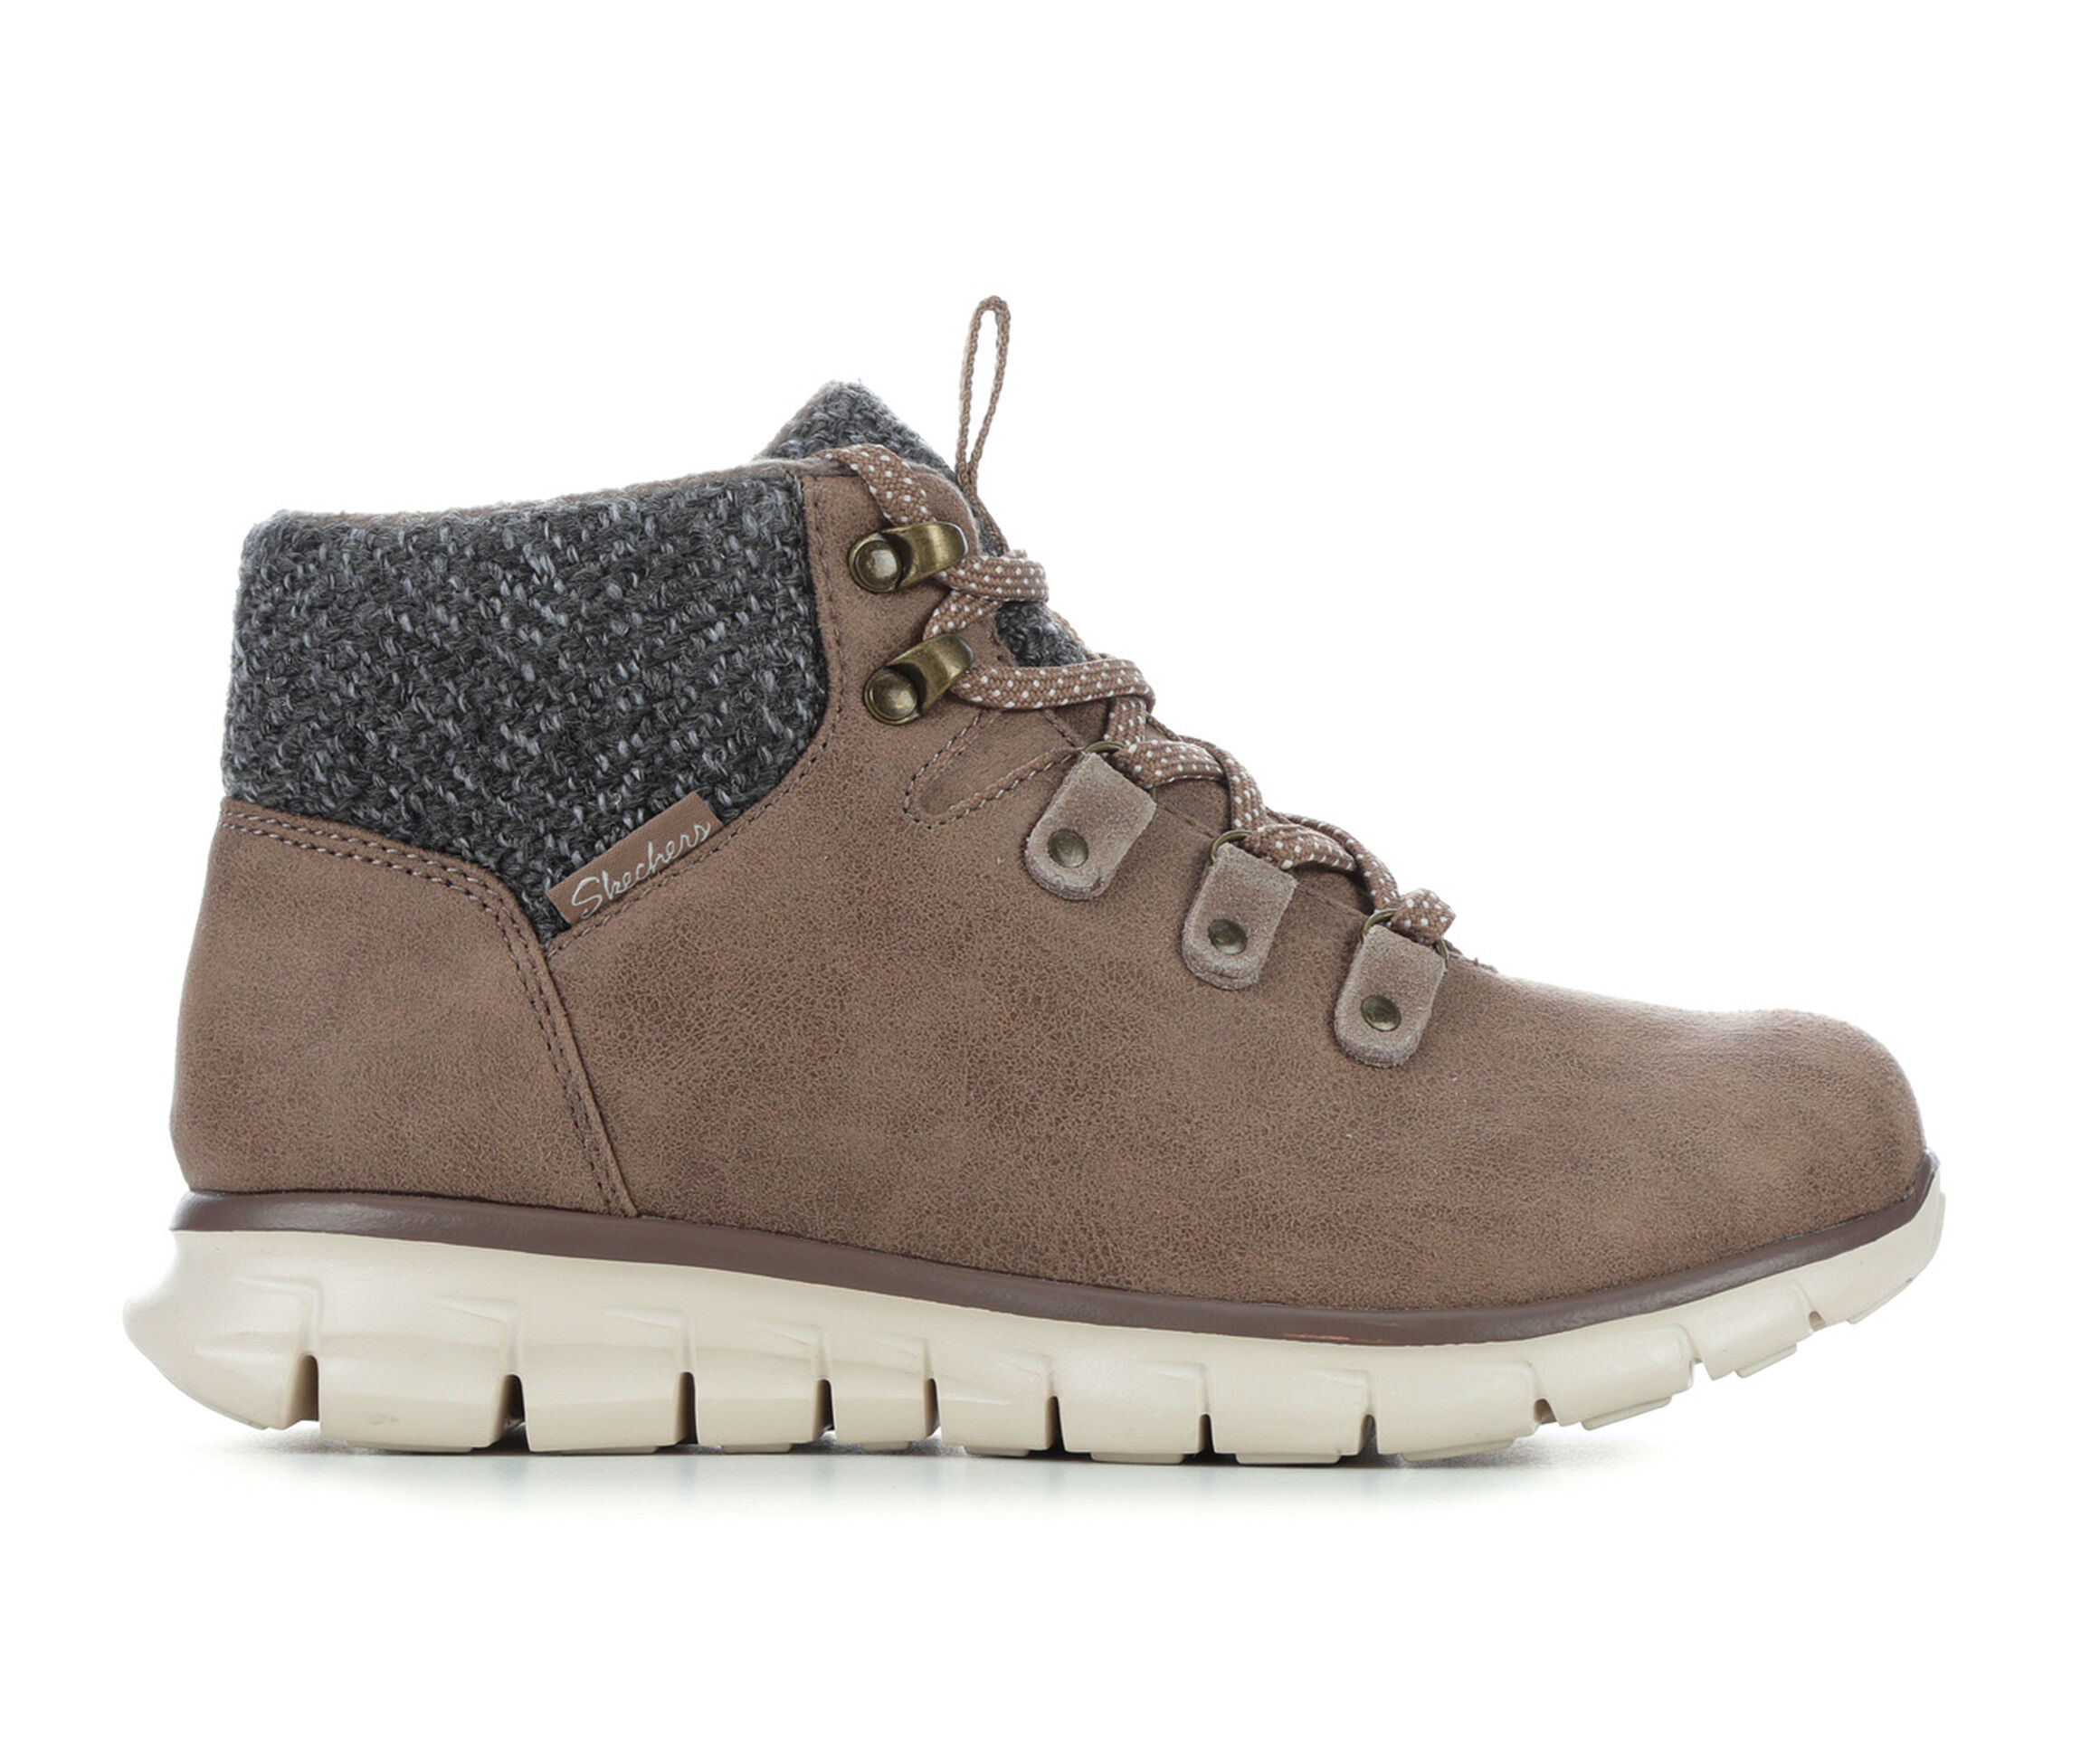 Shop Now For The Skechers Synergy Mountain Dreamer Women's Boot (Beige -  Size 6 - FABRIC) | AccuWeather Shop